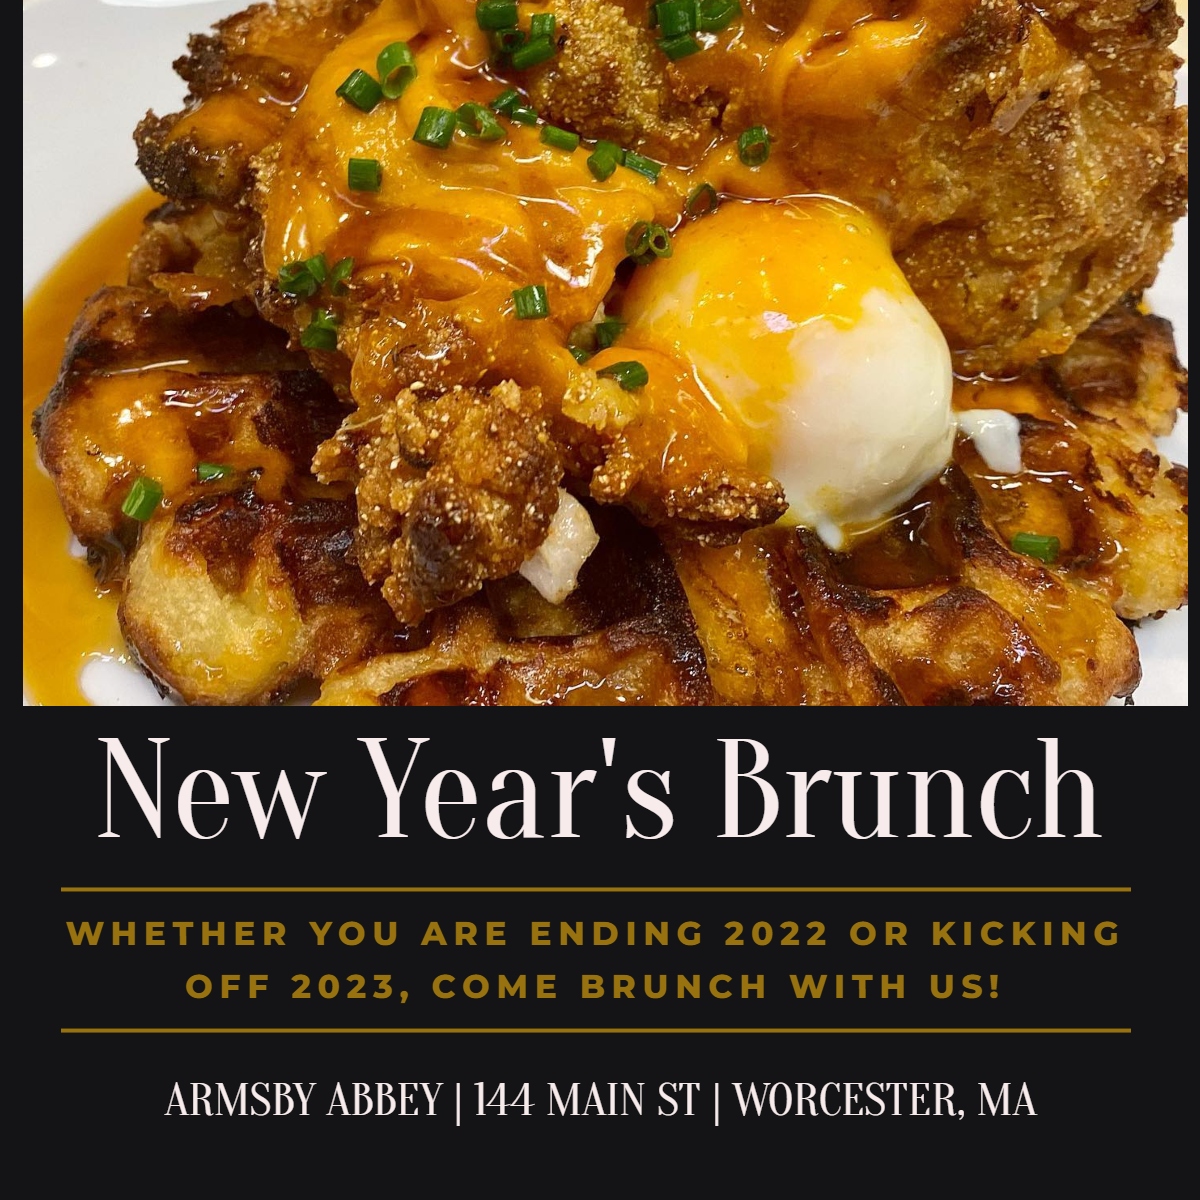 News years brunch in Worcester at the Armsby Abbey